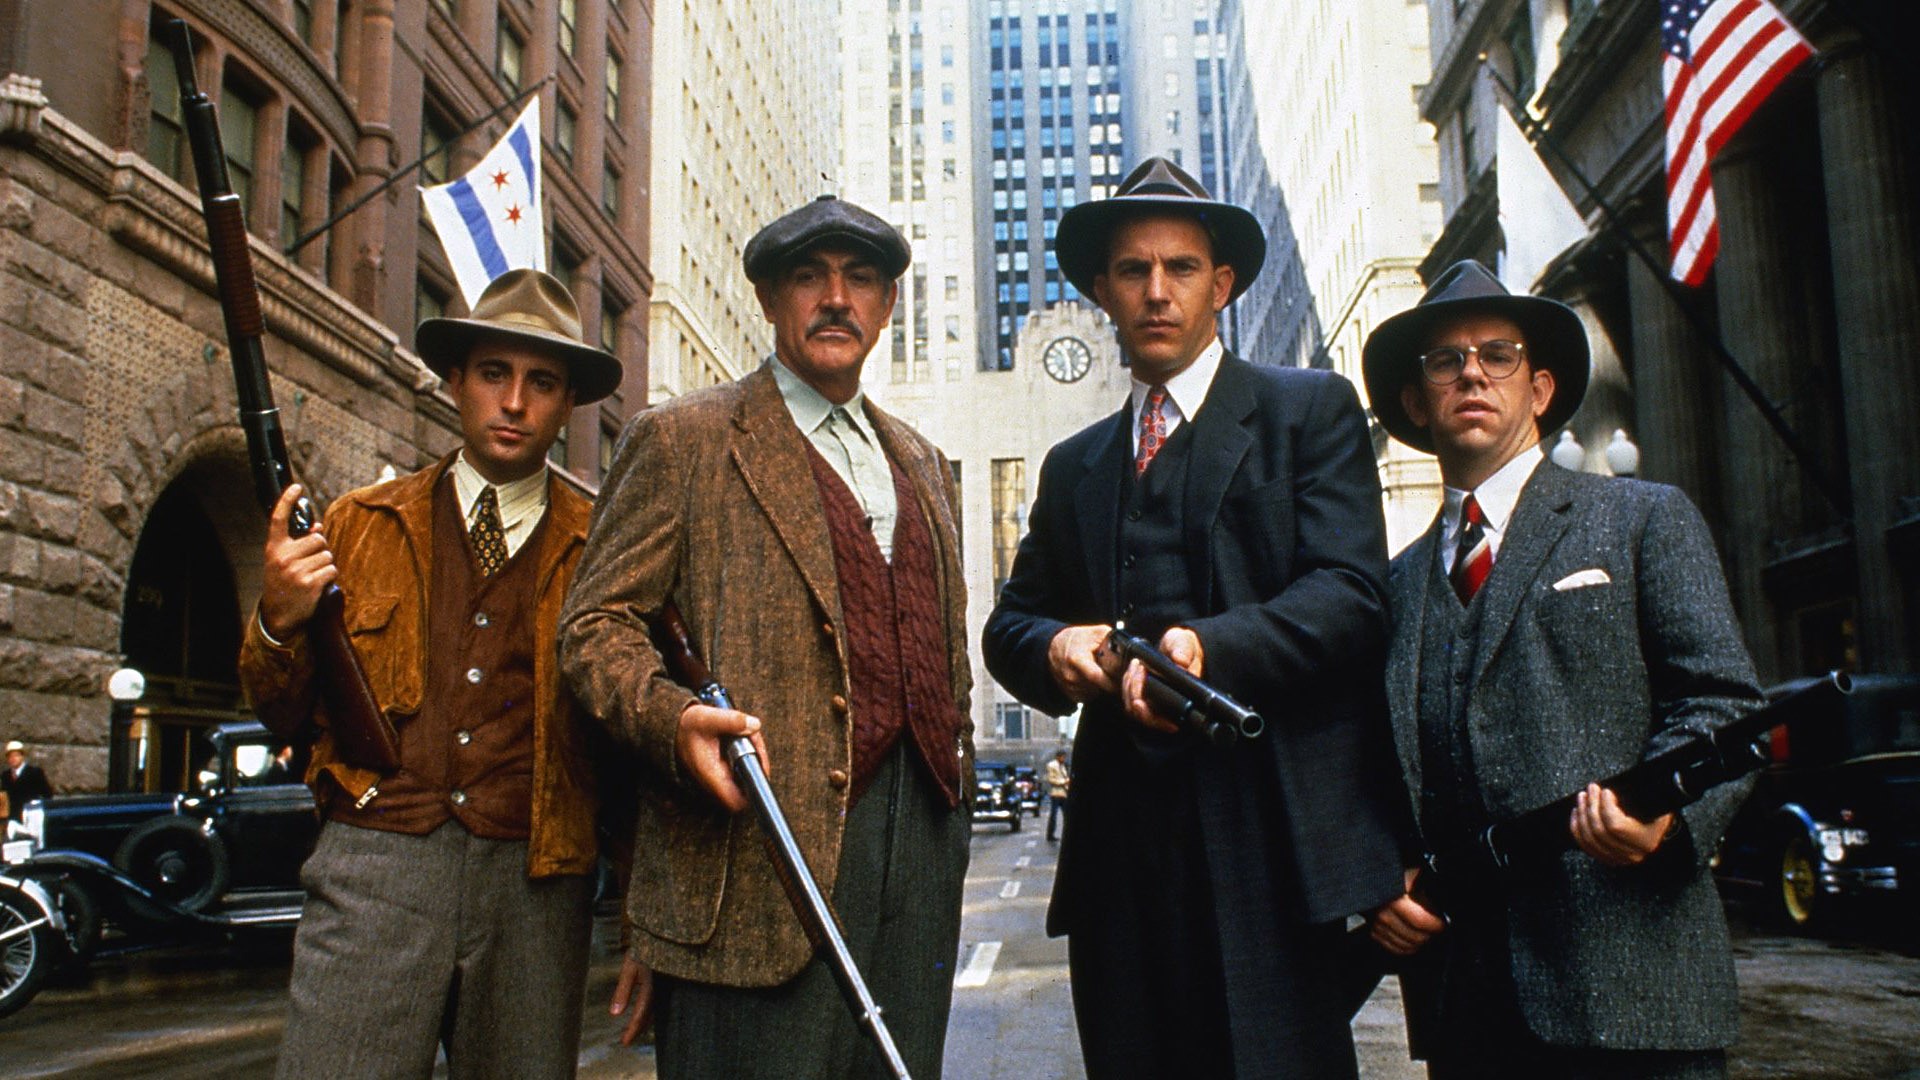 People 1920x1080 men actor movies film stills suits tie Sean Connery gun rifles street Chicago vintage looking at viewer skyscraper hat old car detectives building flag USA group of people car shotgun Andy Garcia Charles Martin Smith The Untouchables Kevin Costner